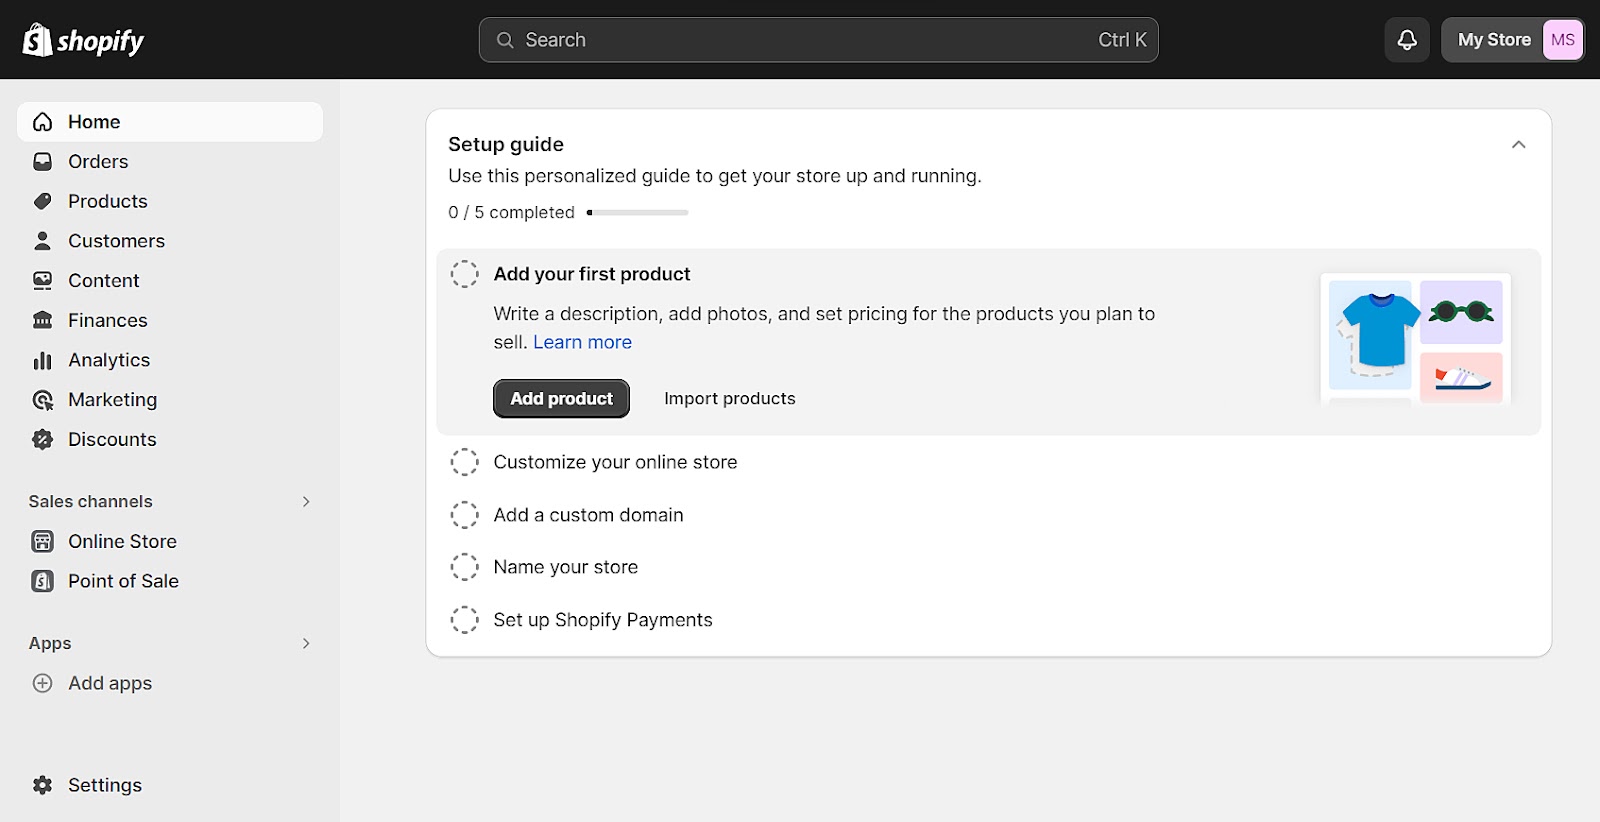 Shopify homepage, with setup guide